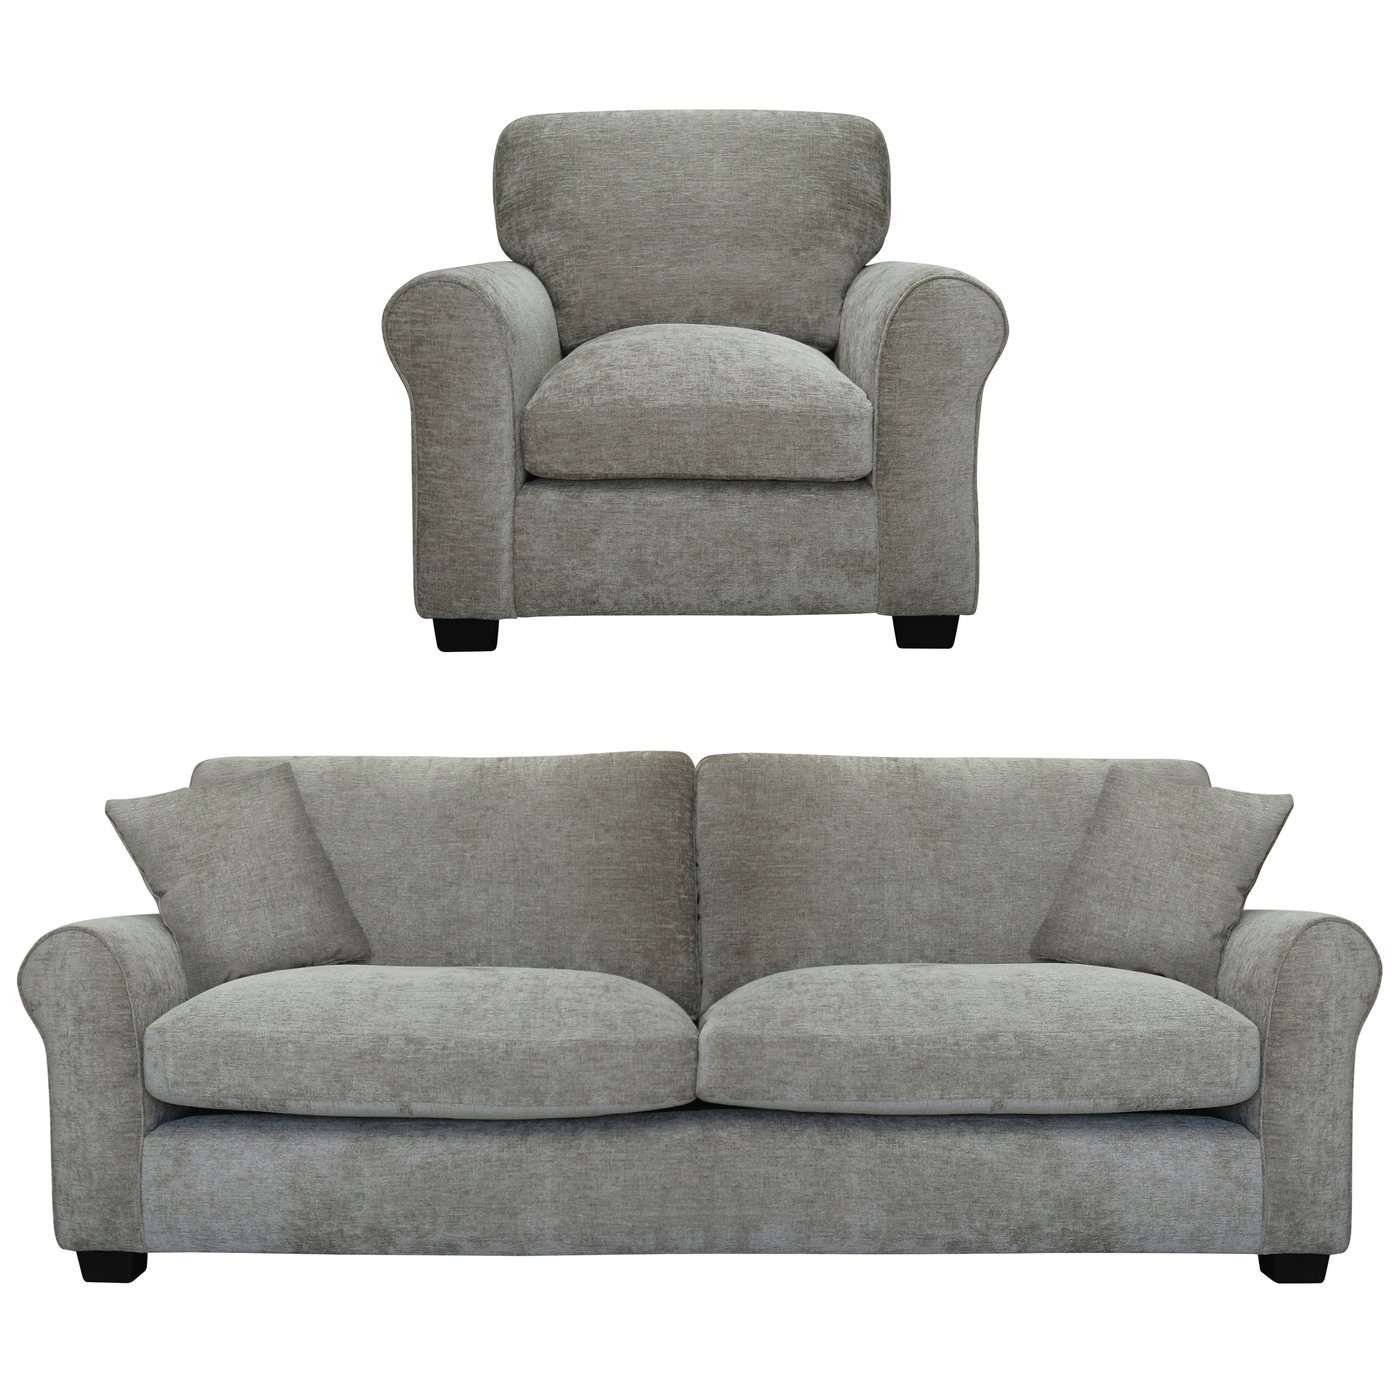 Argos Home Tammy Fabric Chair and 4 Seater Sofa - Mink